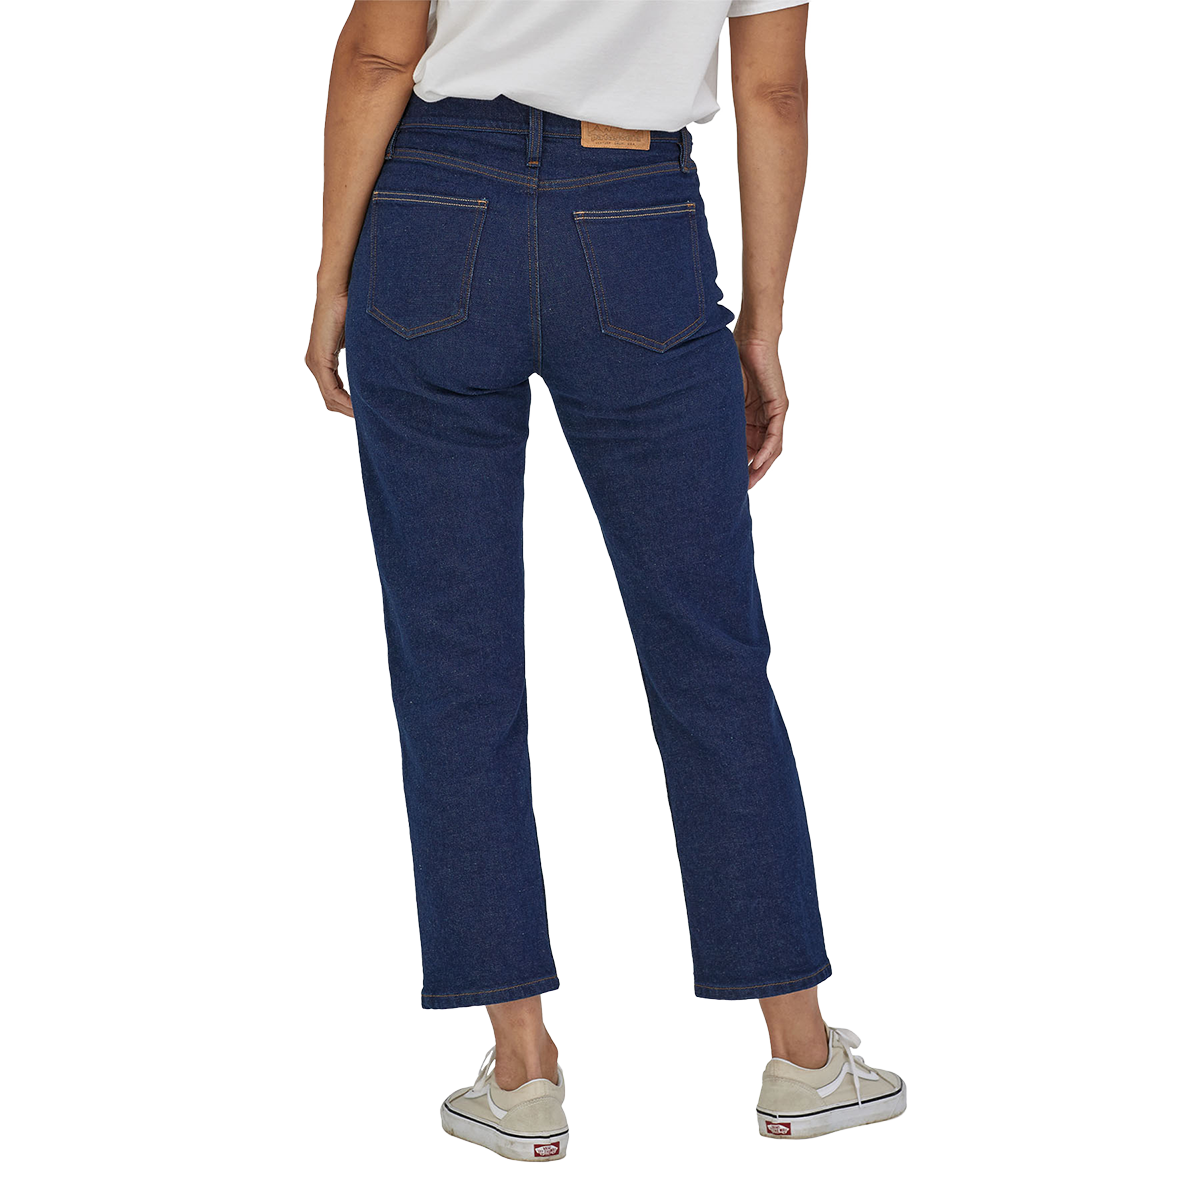 Women's Straight Fit Jeans alternate view